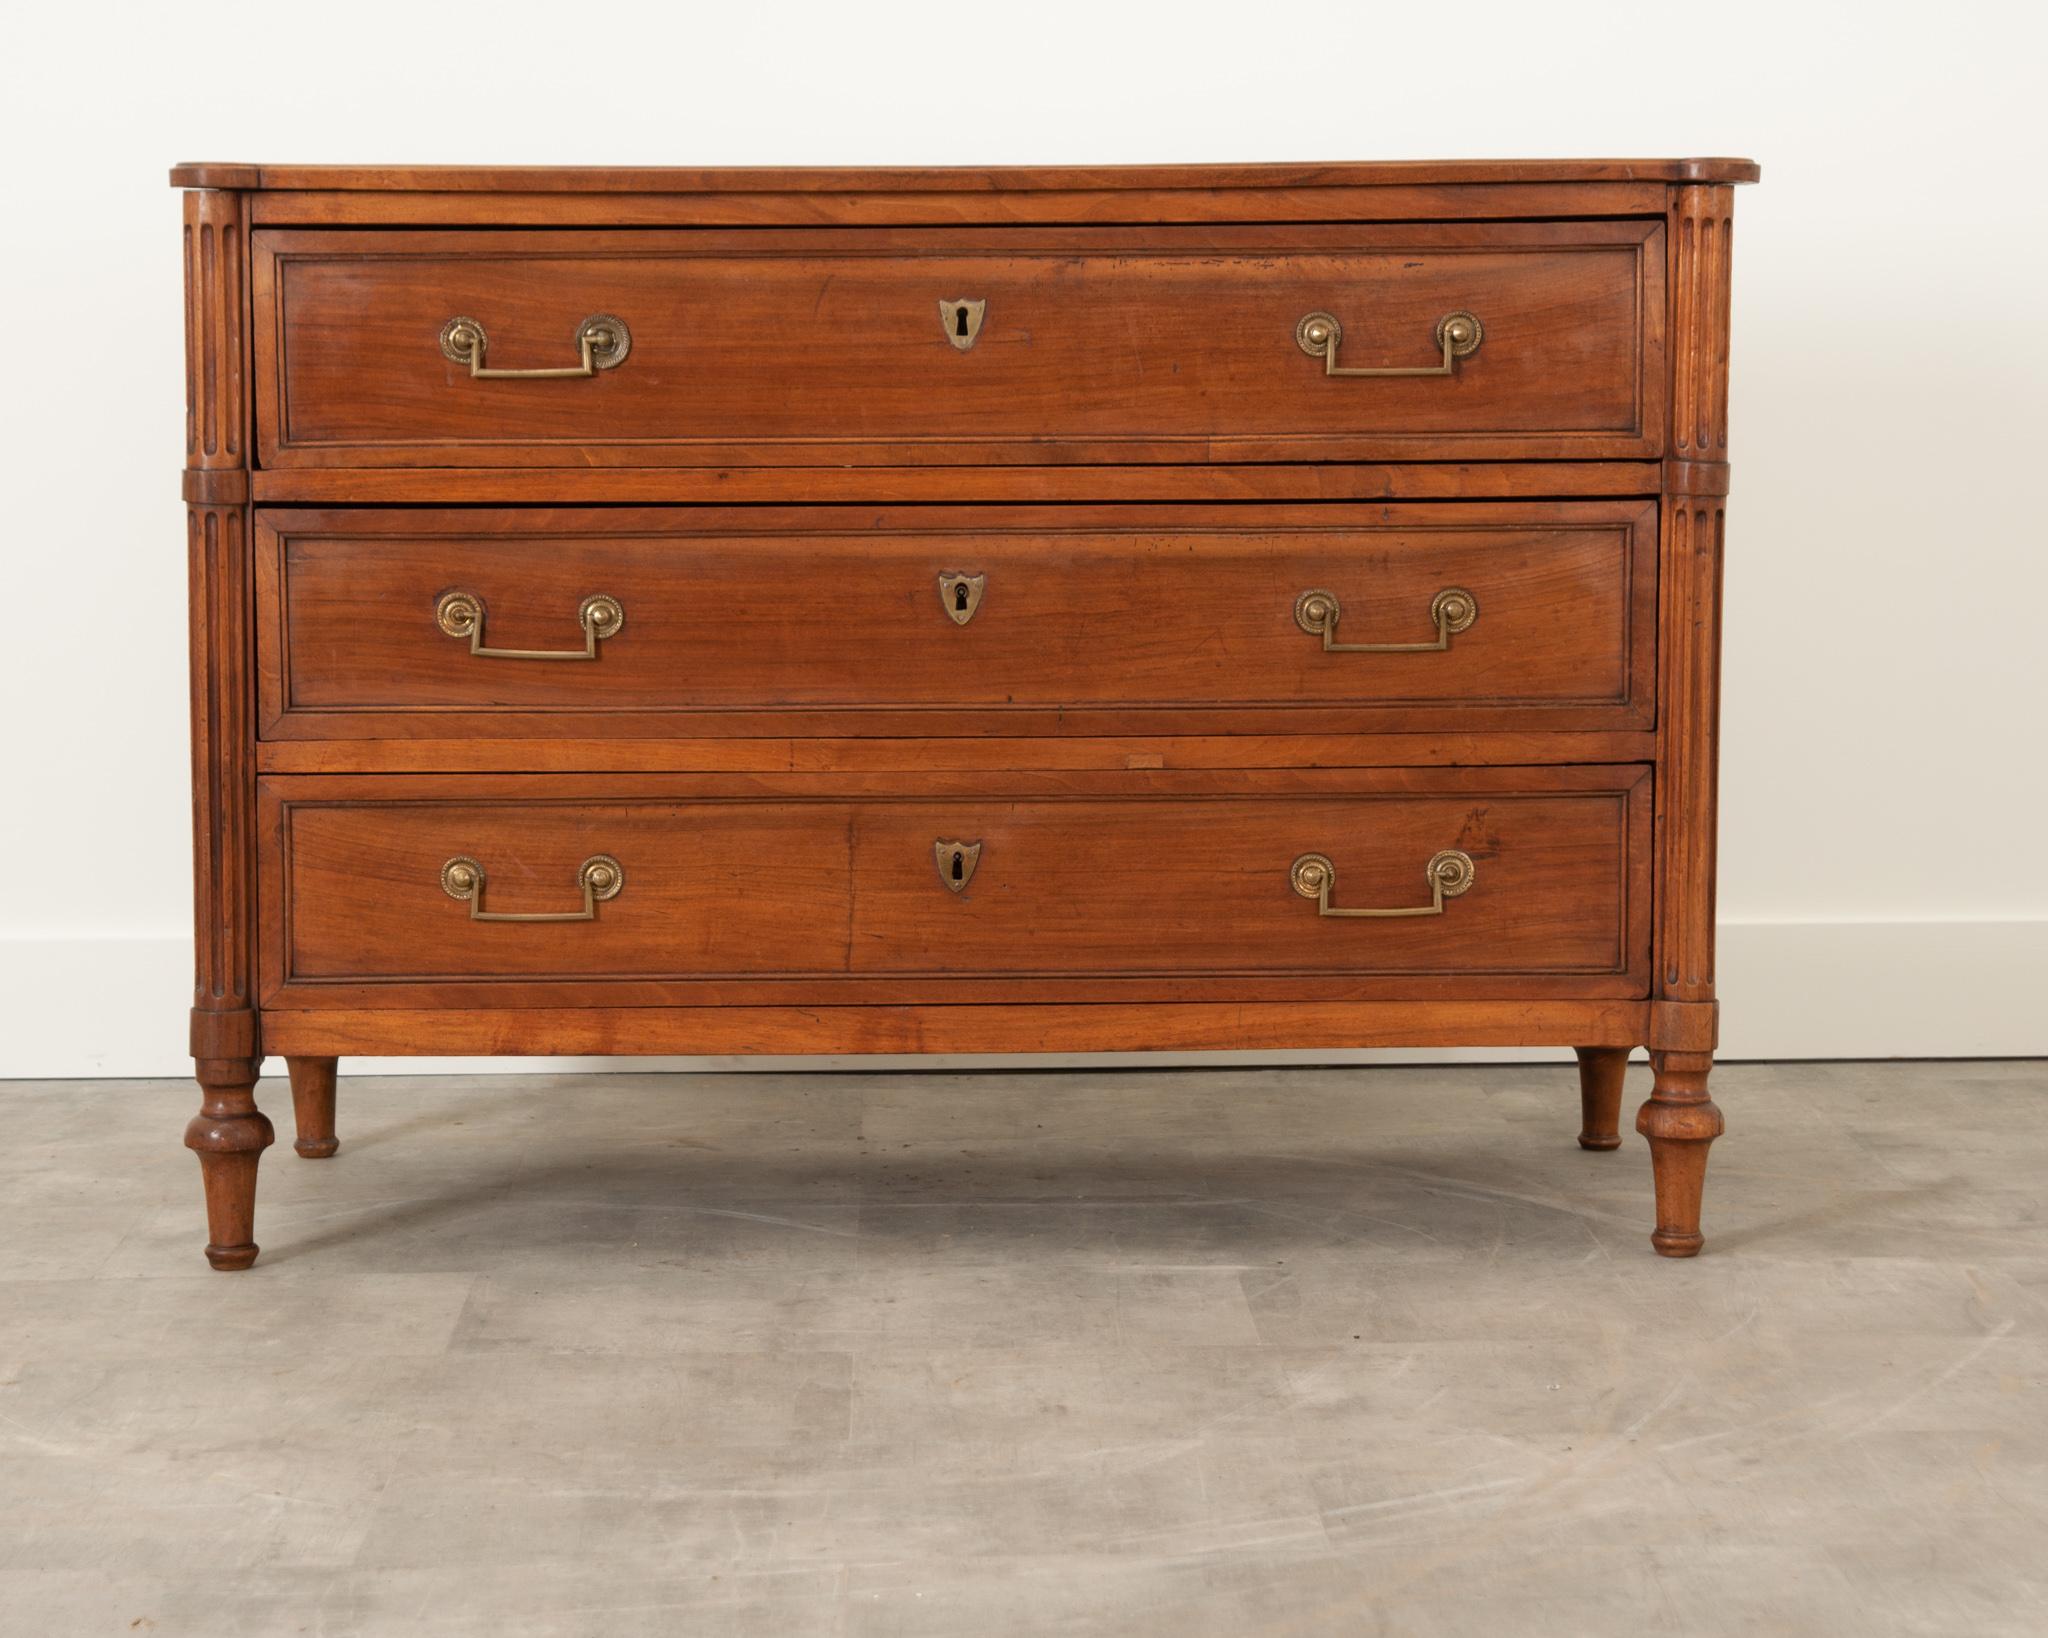 A handsome solid walnut commode from 19th century France, crafted in the style of Louis XVI. The three sizable paneled drawers are flanked by tureted, fluted corners. Each drawer is fixed with a pair of cast brass bail pulls and a shield shaped